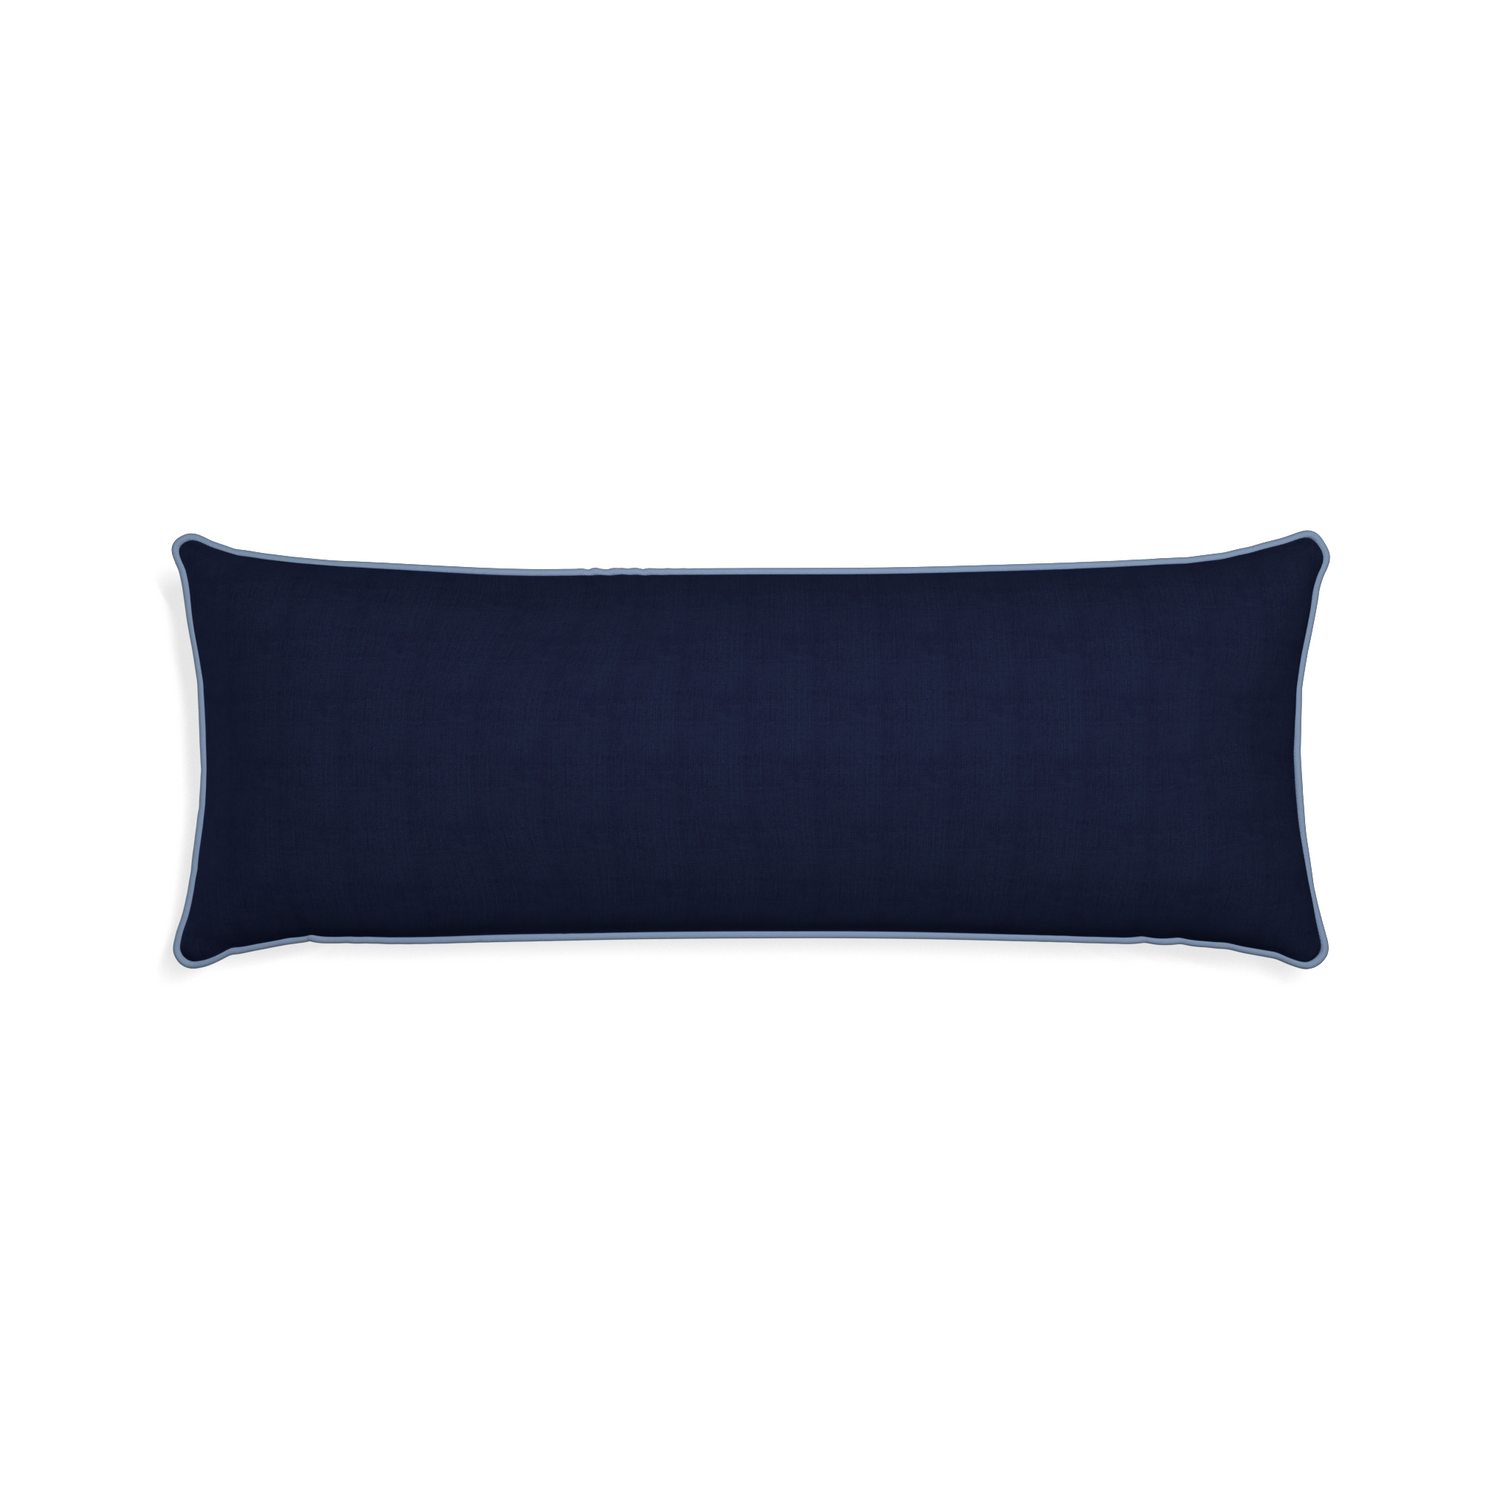 Xl-lumbar midnight custom navy bluepillow with sky piping on white background